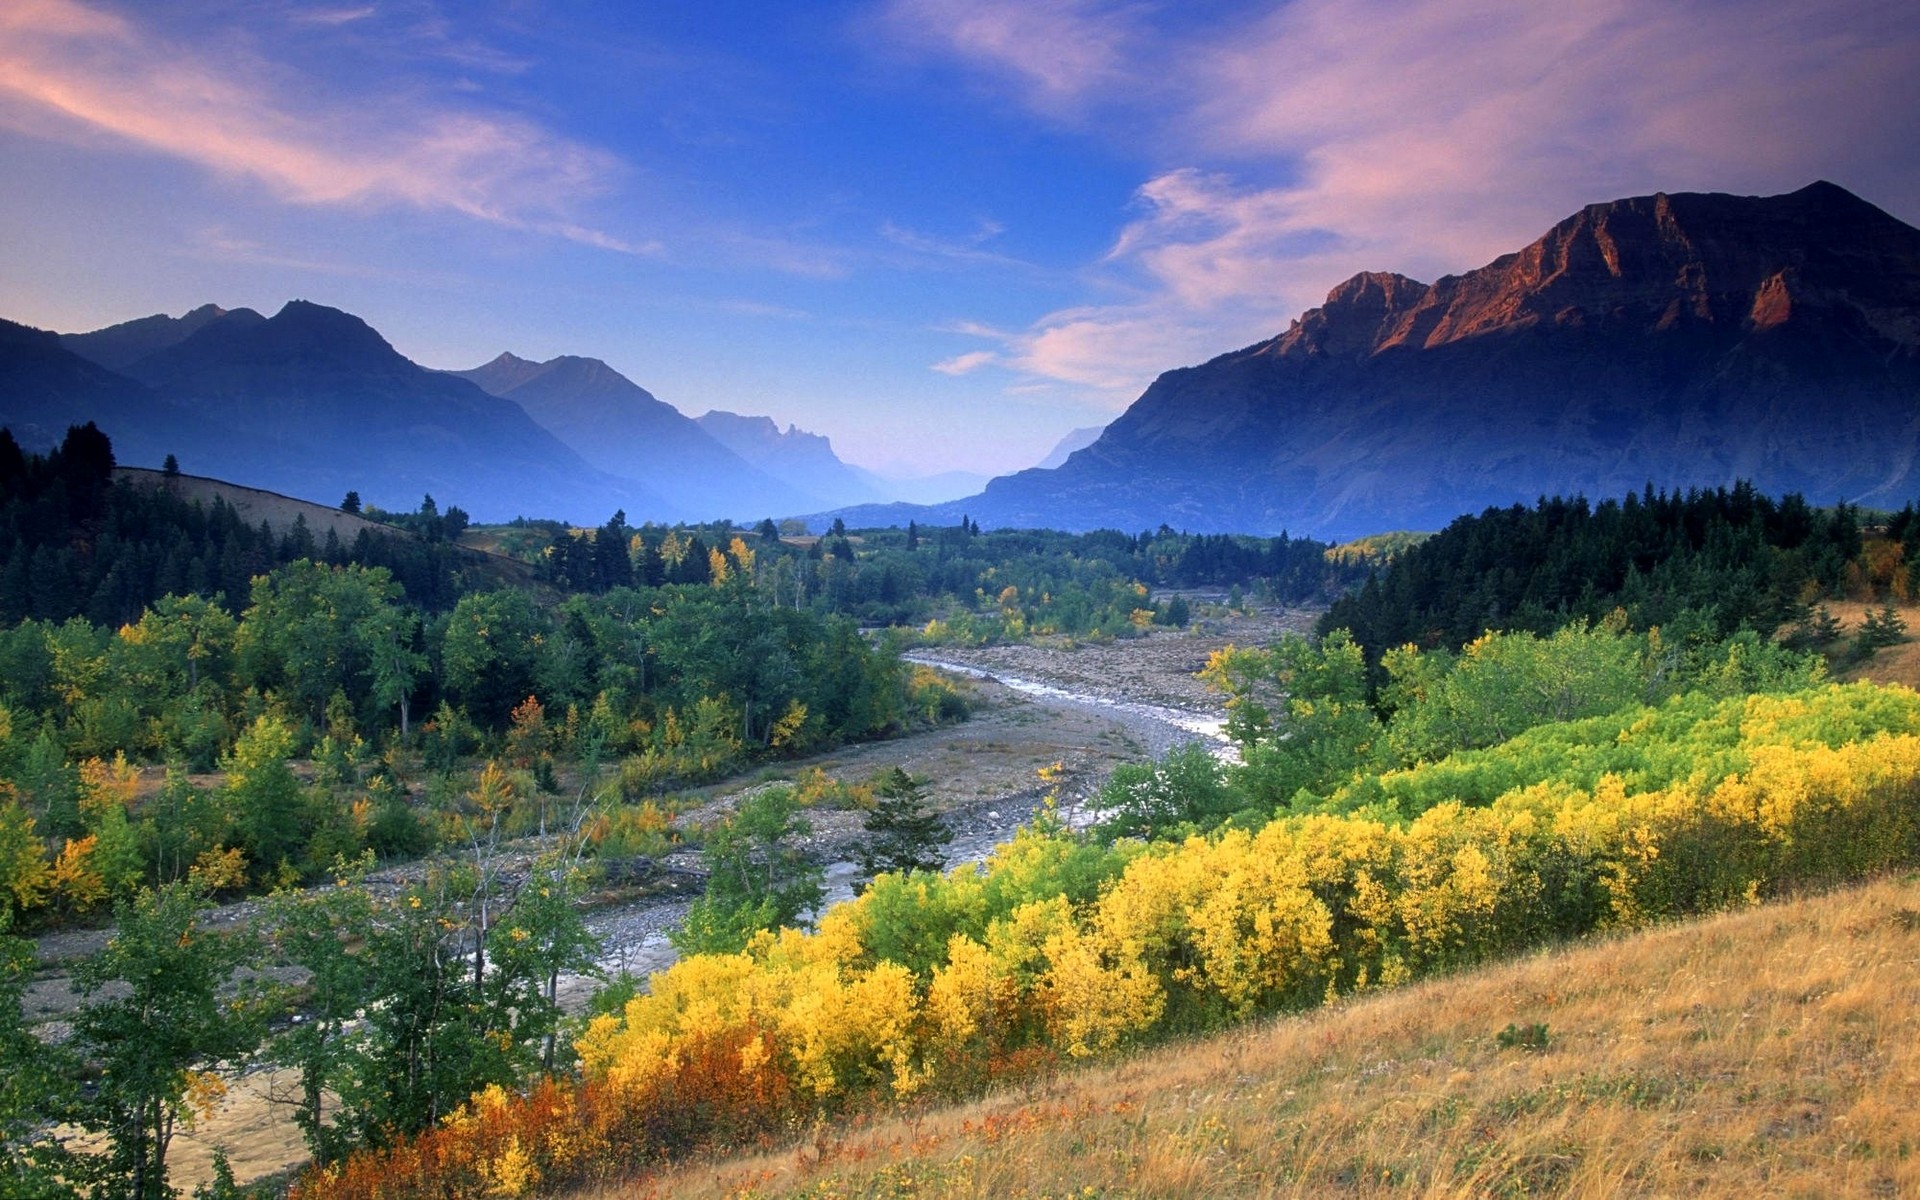 General 1920x1200 nature landscape river fall mountains mist sunset forest clouds yellow blue green shrubs trees